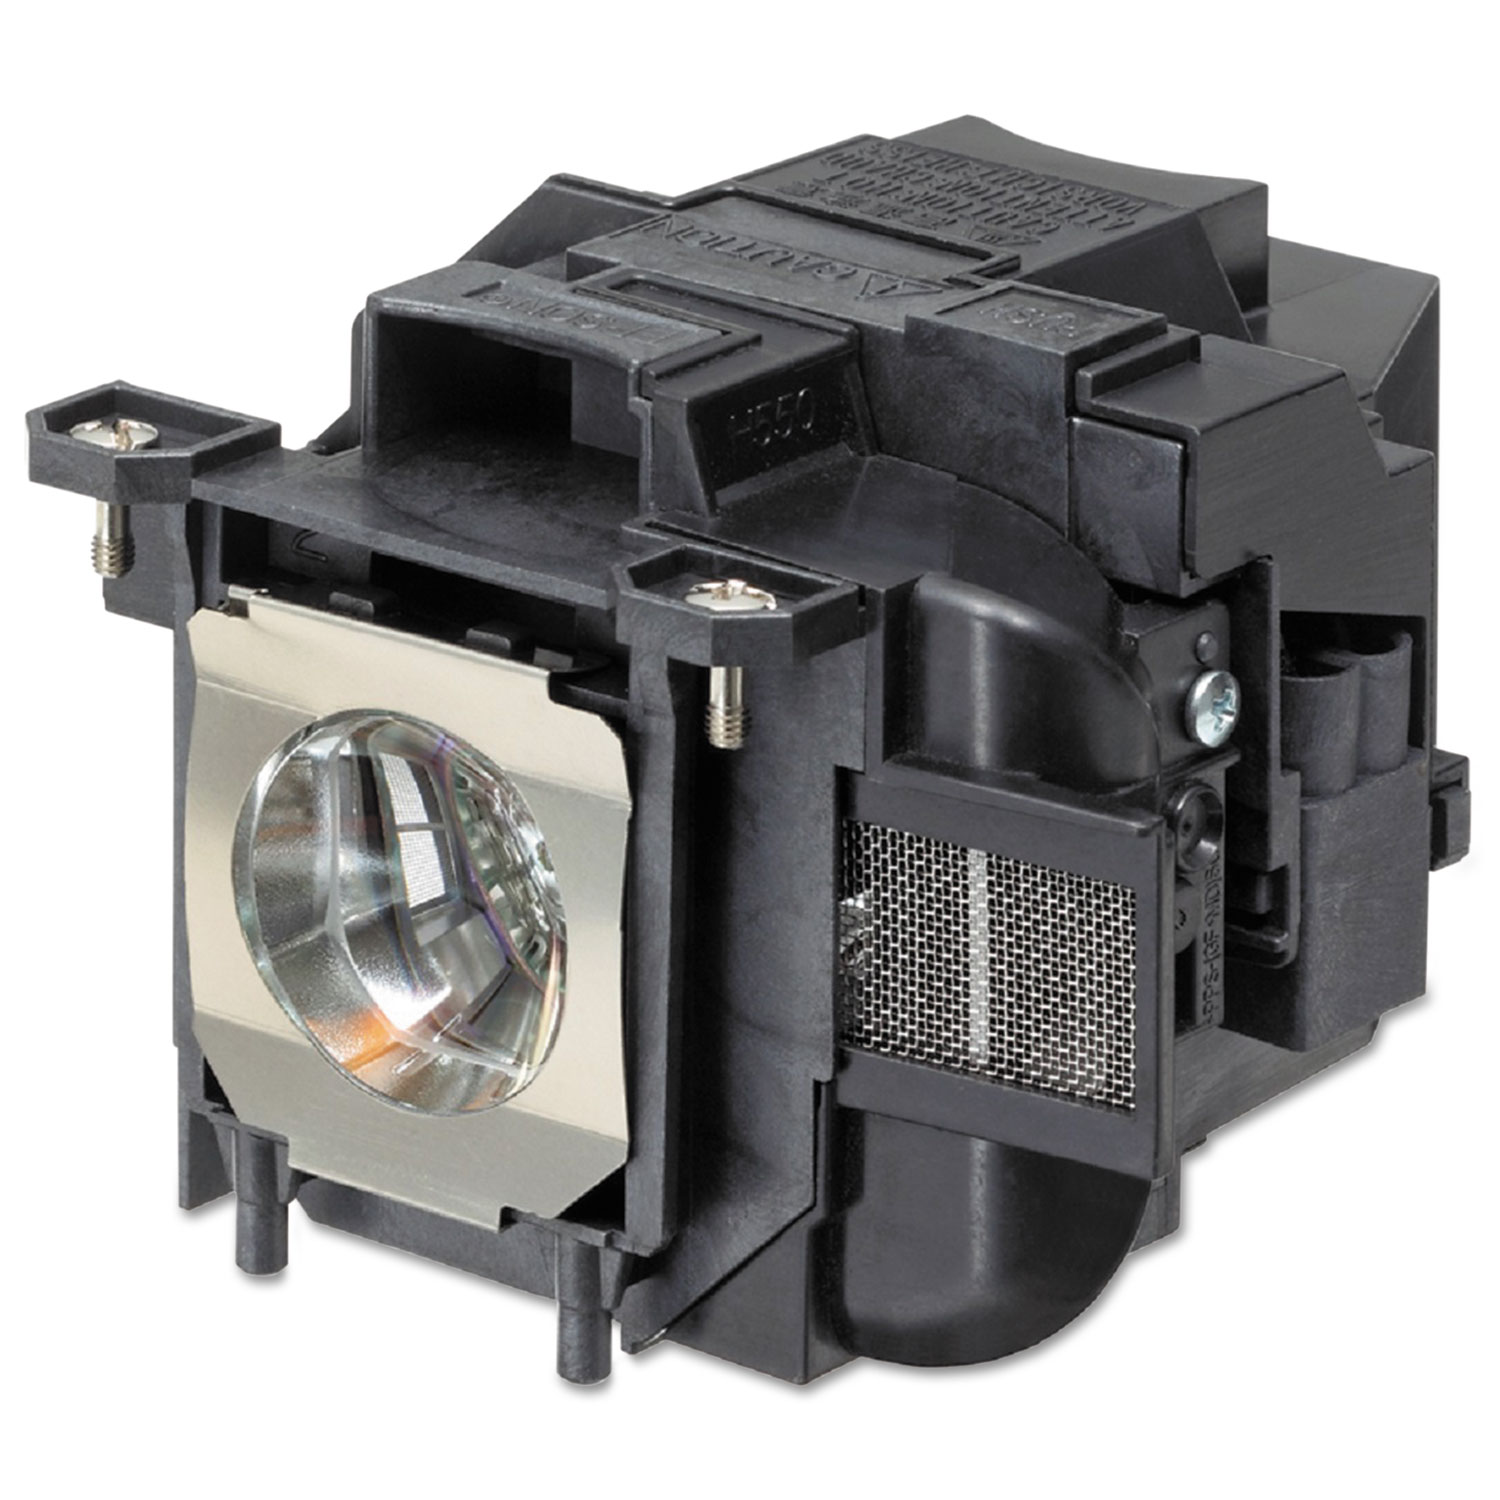 Replacement Projector Lamp for PowerLIte 77c Projector